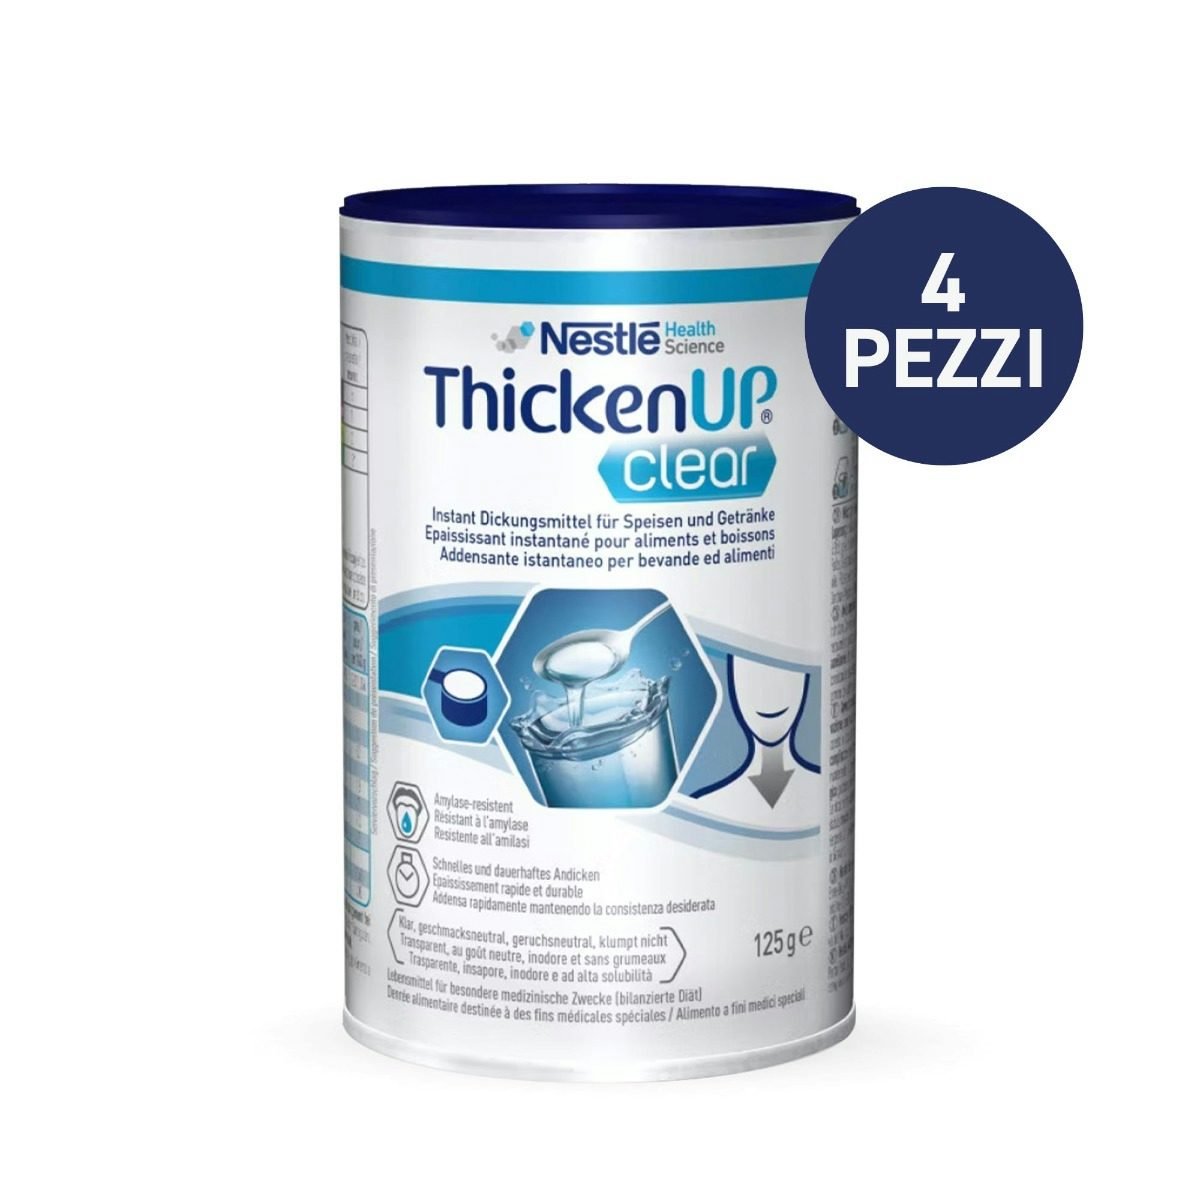 KIT 4 PEZZI THICKENUP CLEAR 125g 0